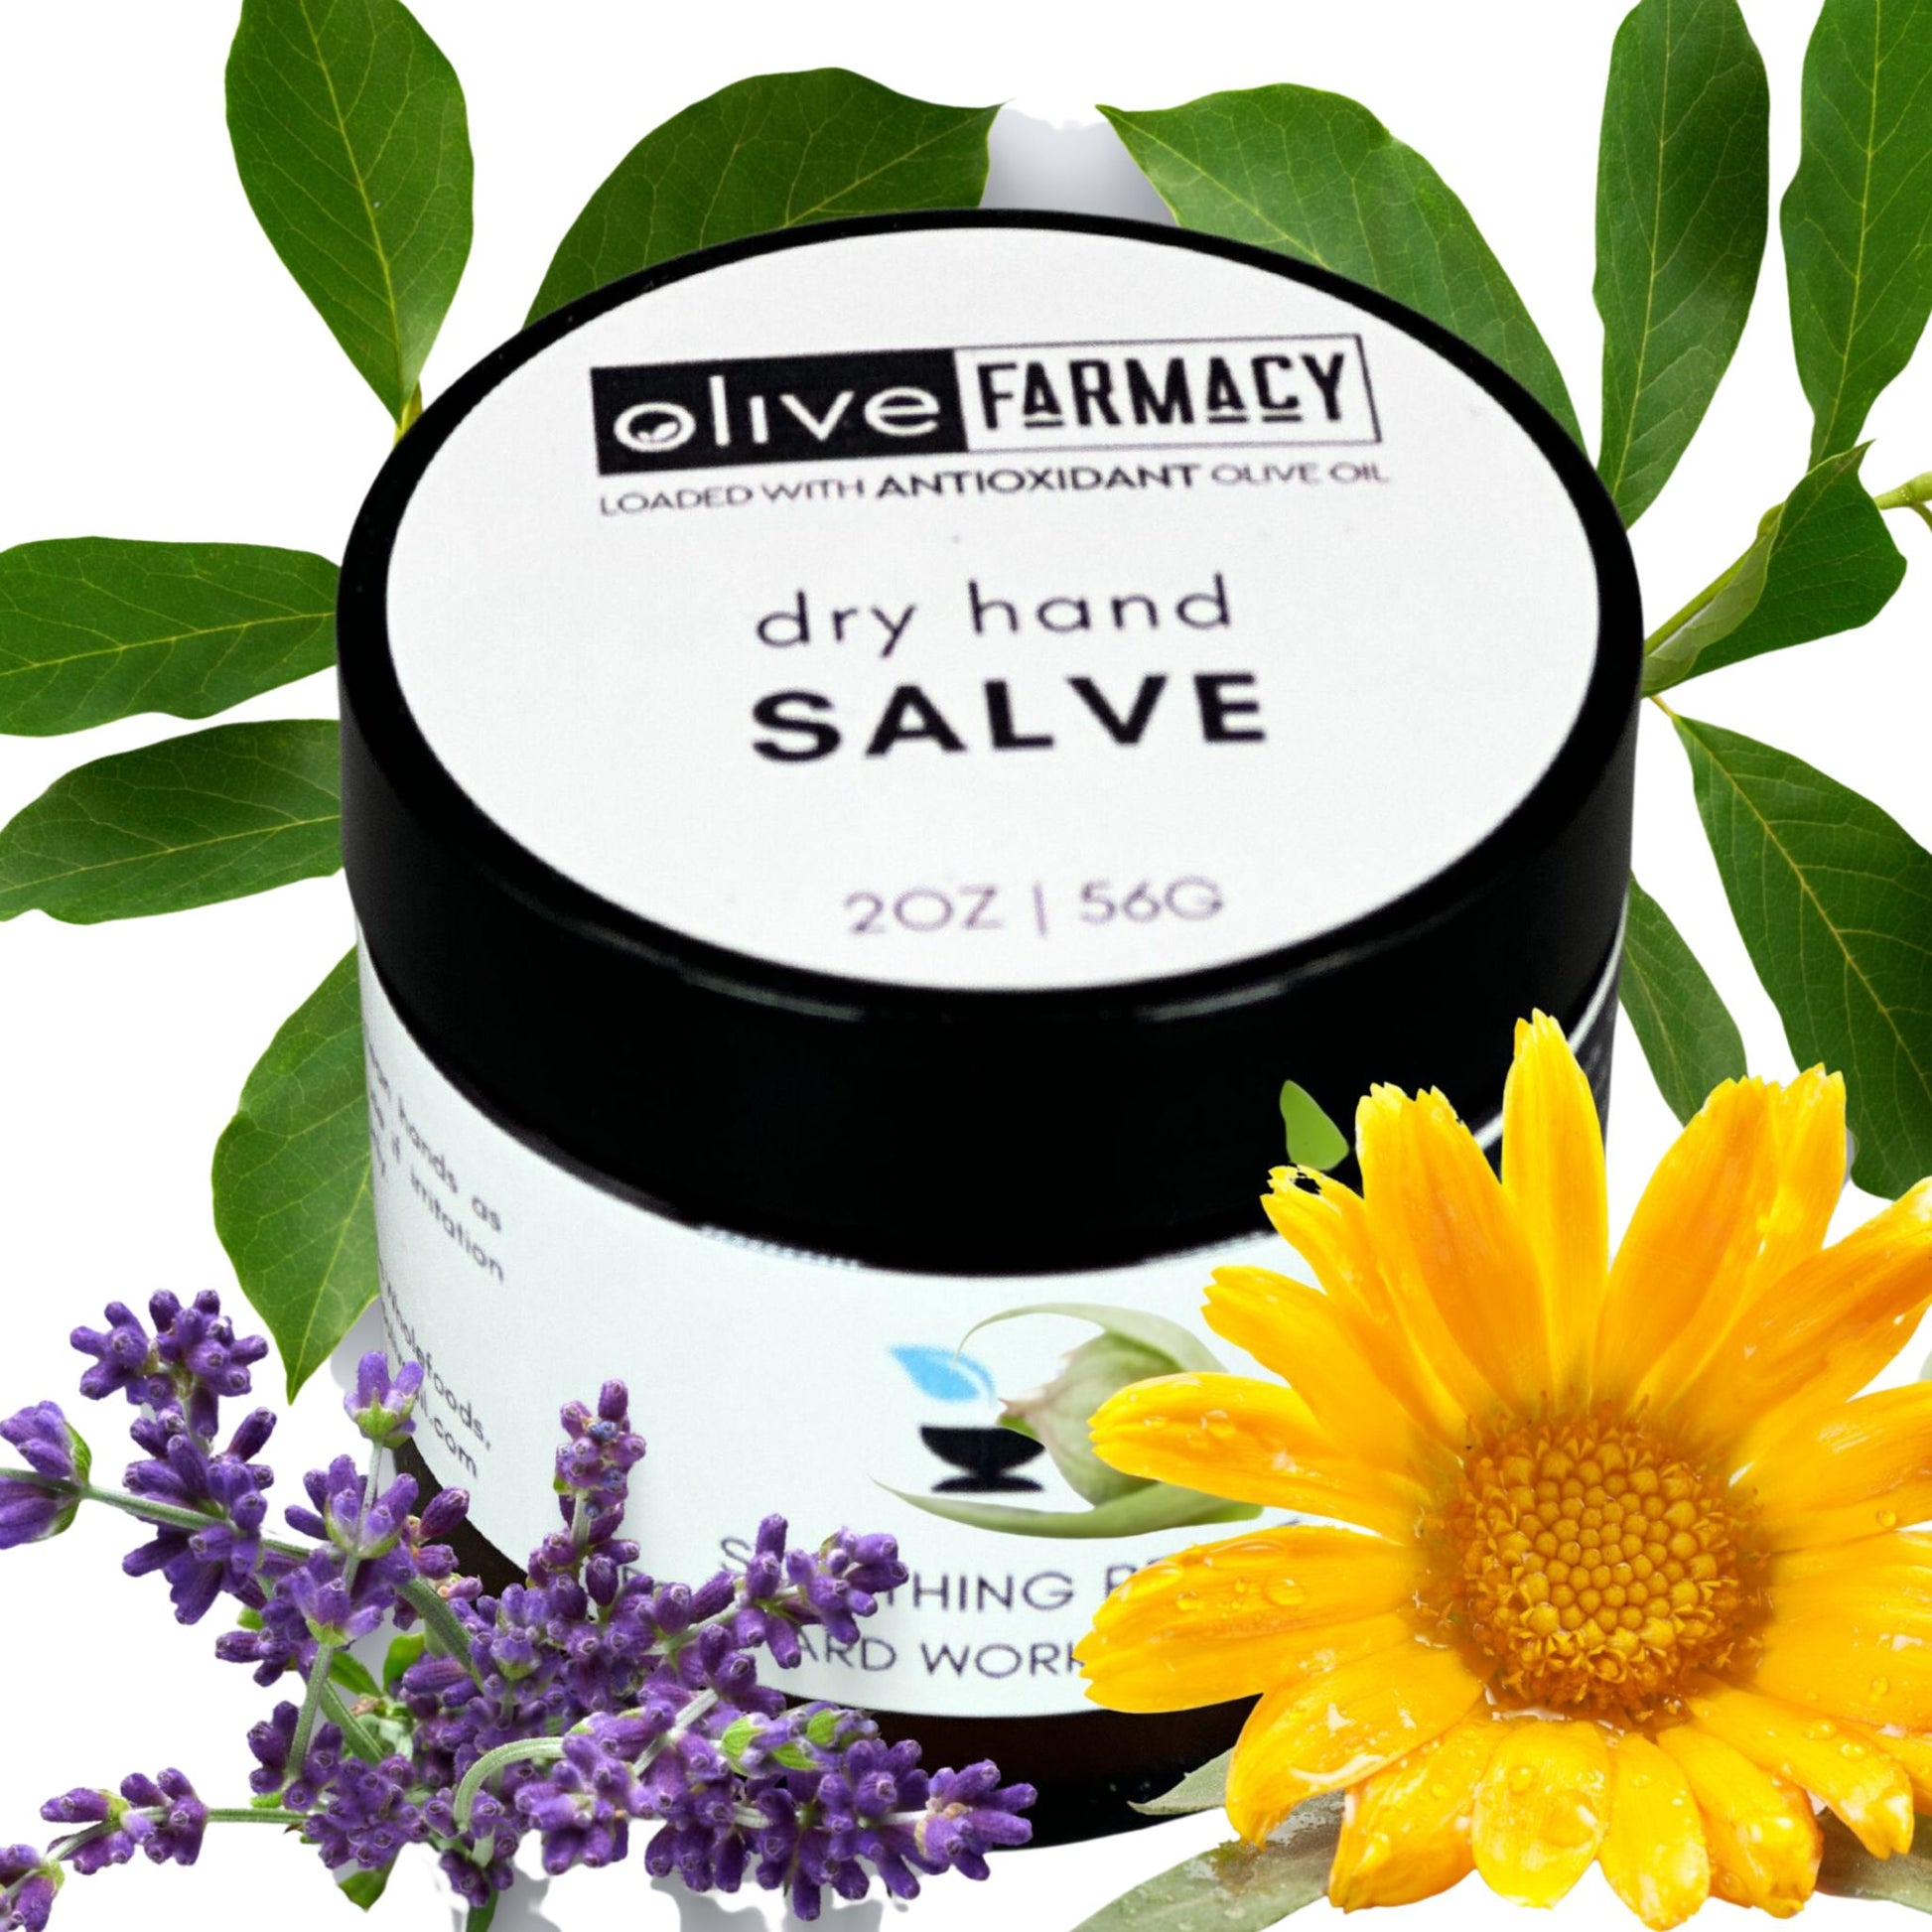 Working Hand Salve for Dry, cracked hands and feet by Olive Farmacy all natural skincare